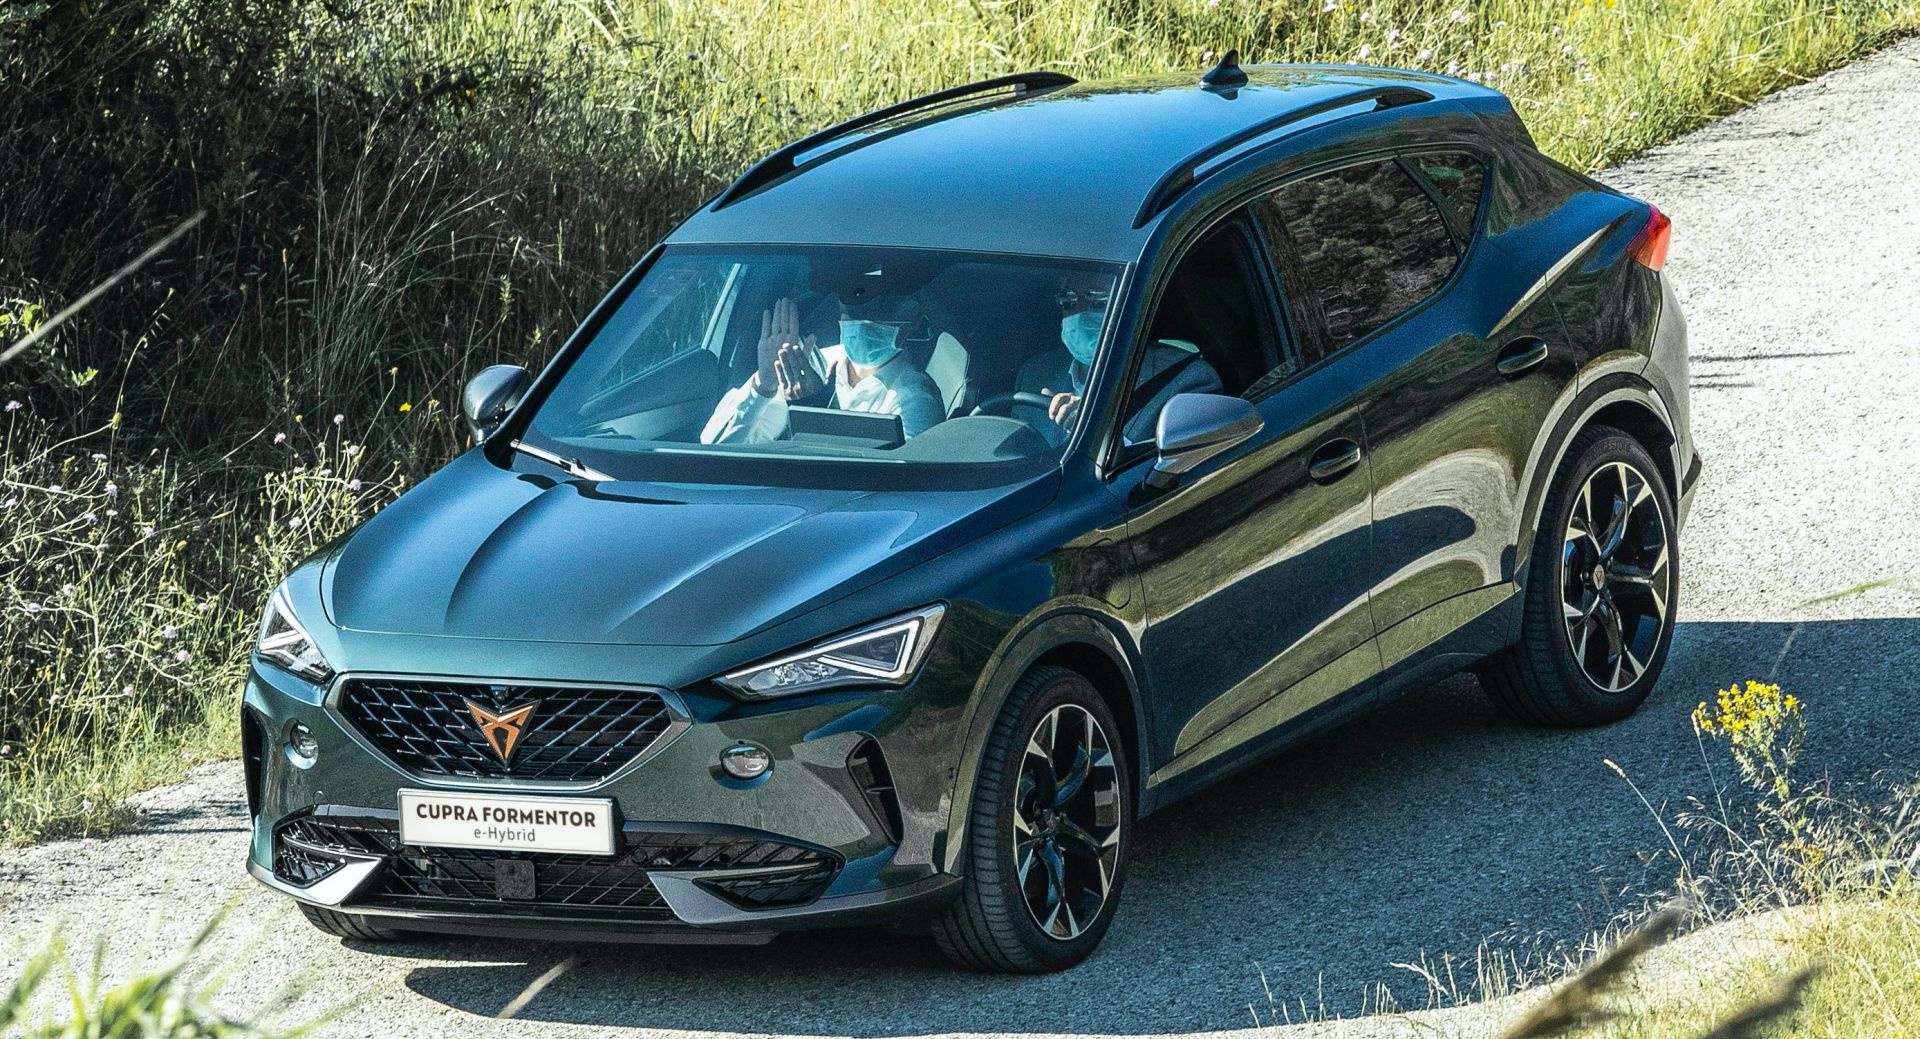 Cupra's first standalone model is the Formentor SUV